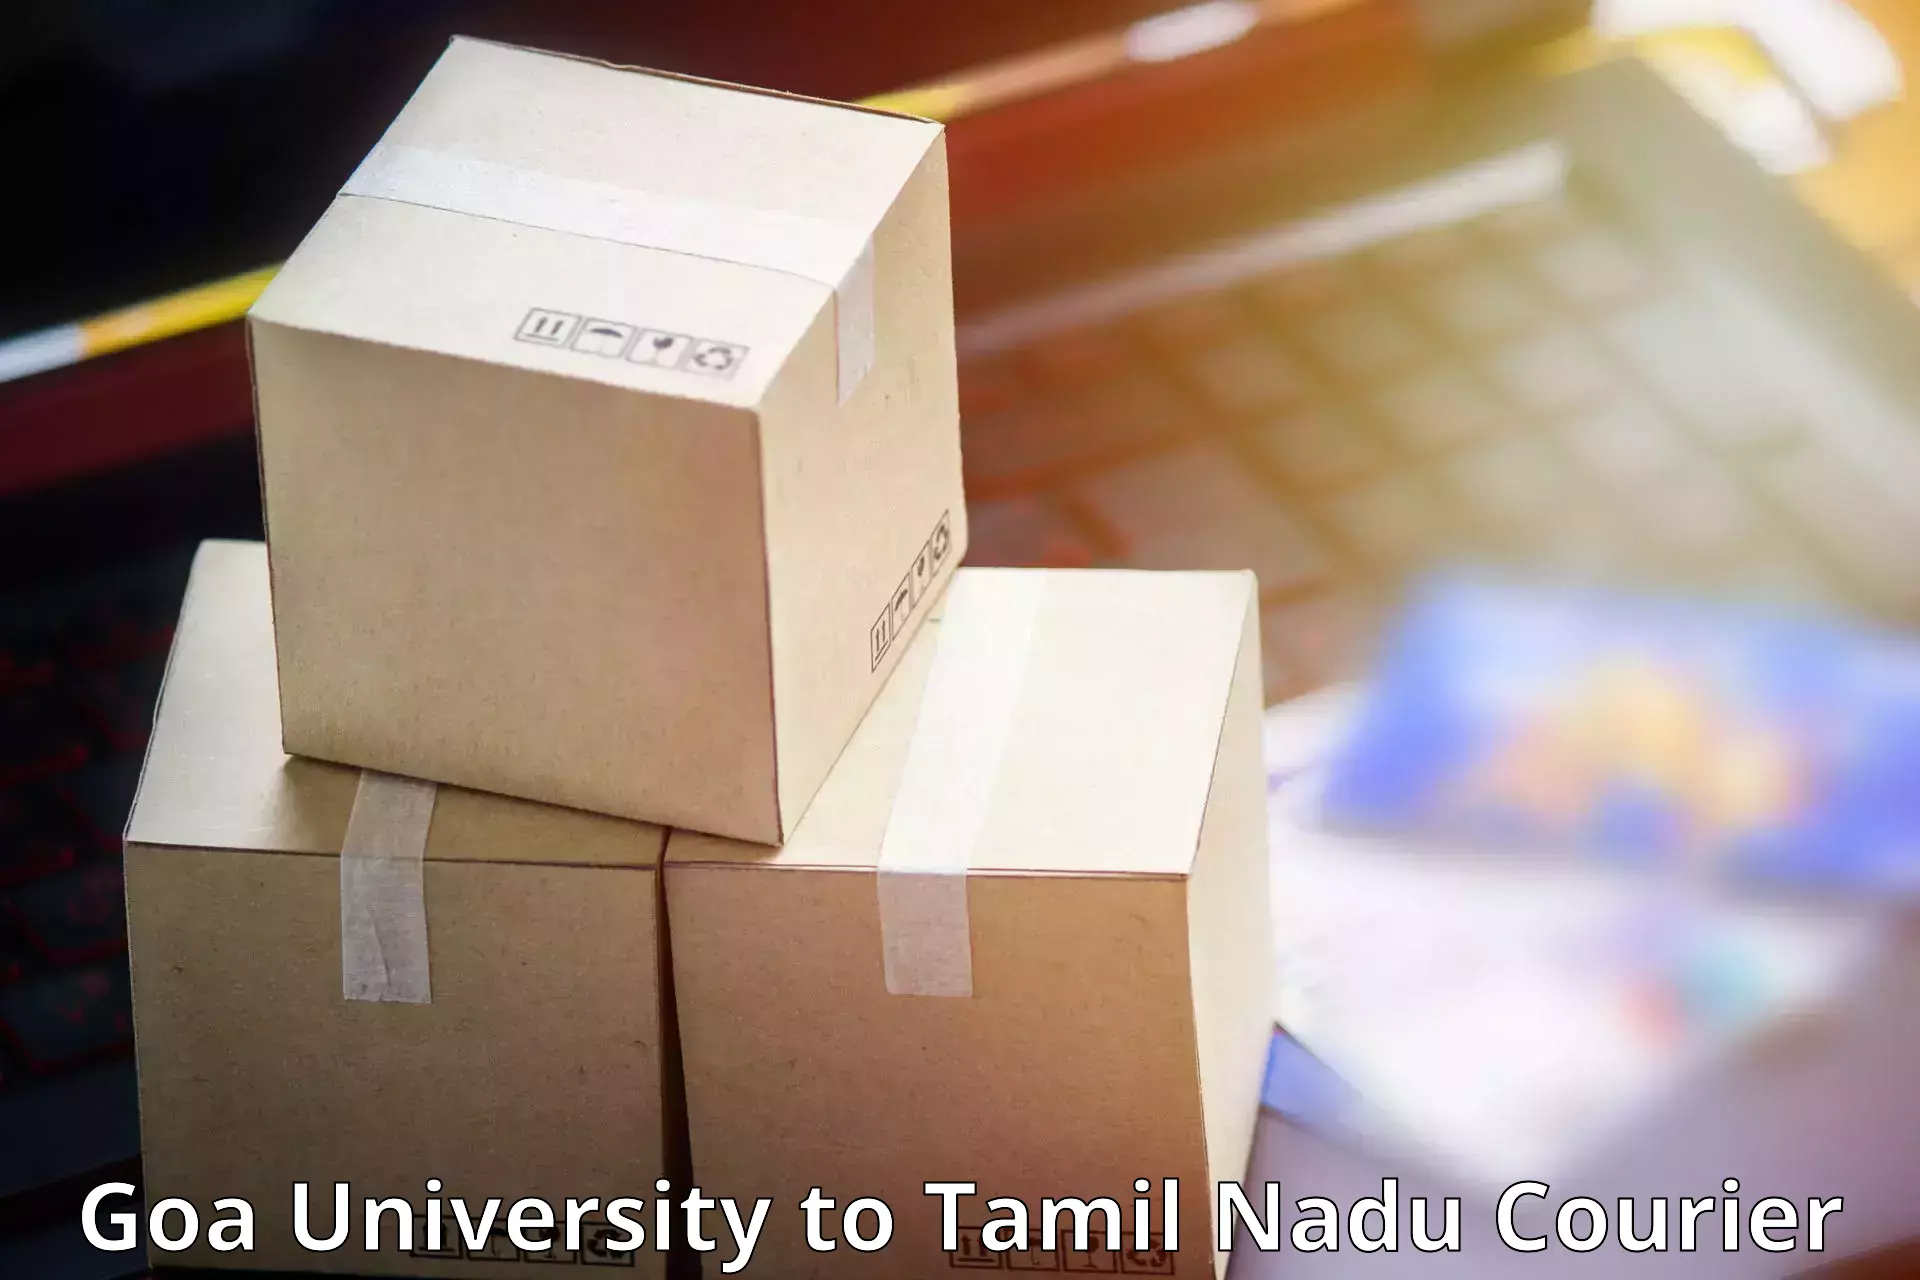 Doorstep delivery service Goa University to Thisayanvilai